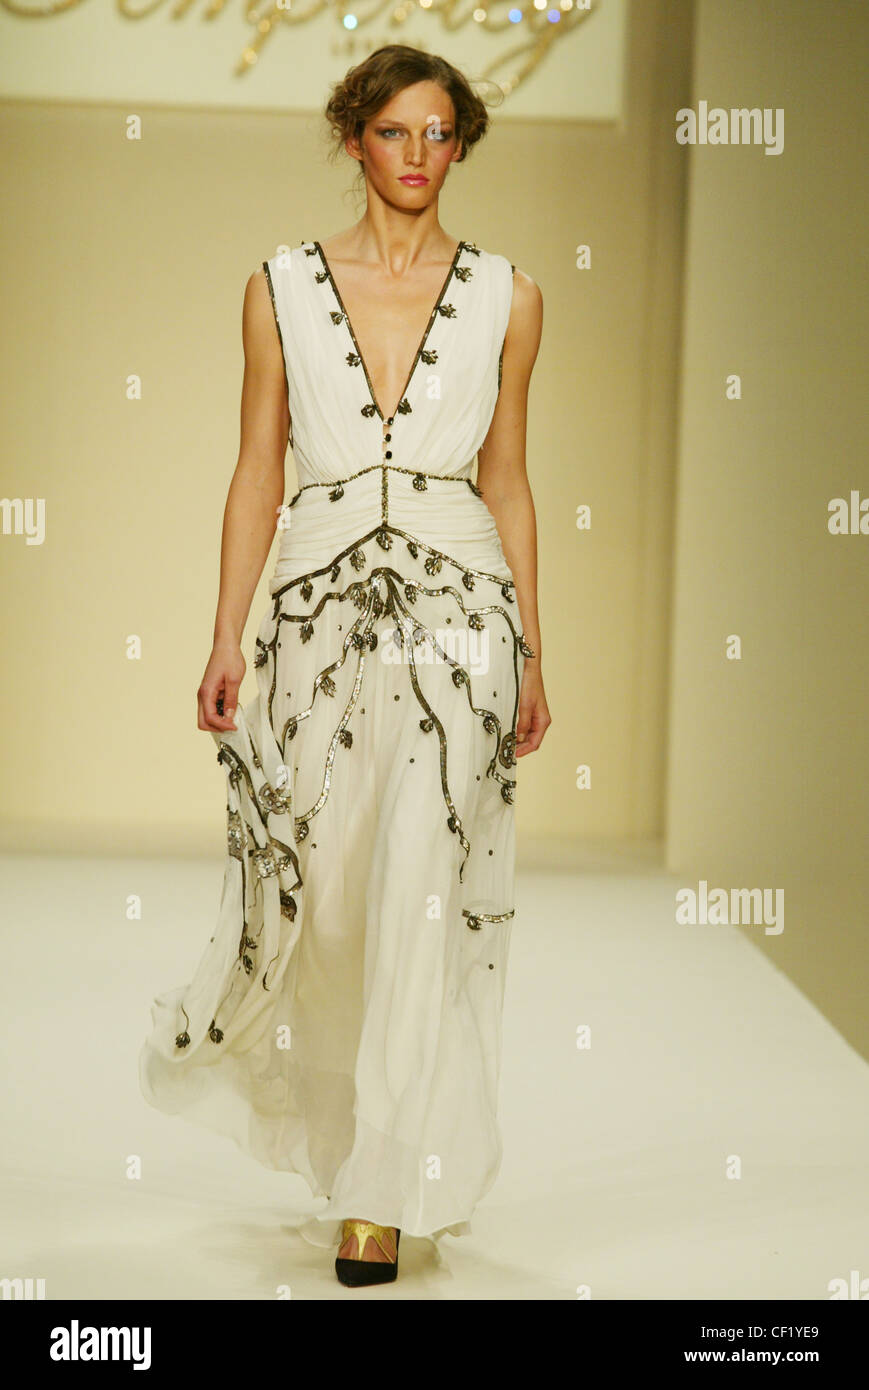 Temperley London Ready To Wear Spring Summer Model wearing ruched low cut  sleeveless white dress silver embroidery, looking to Stock Photo - Alamy